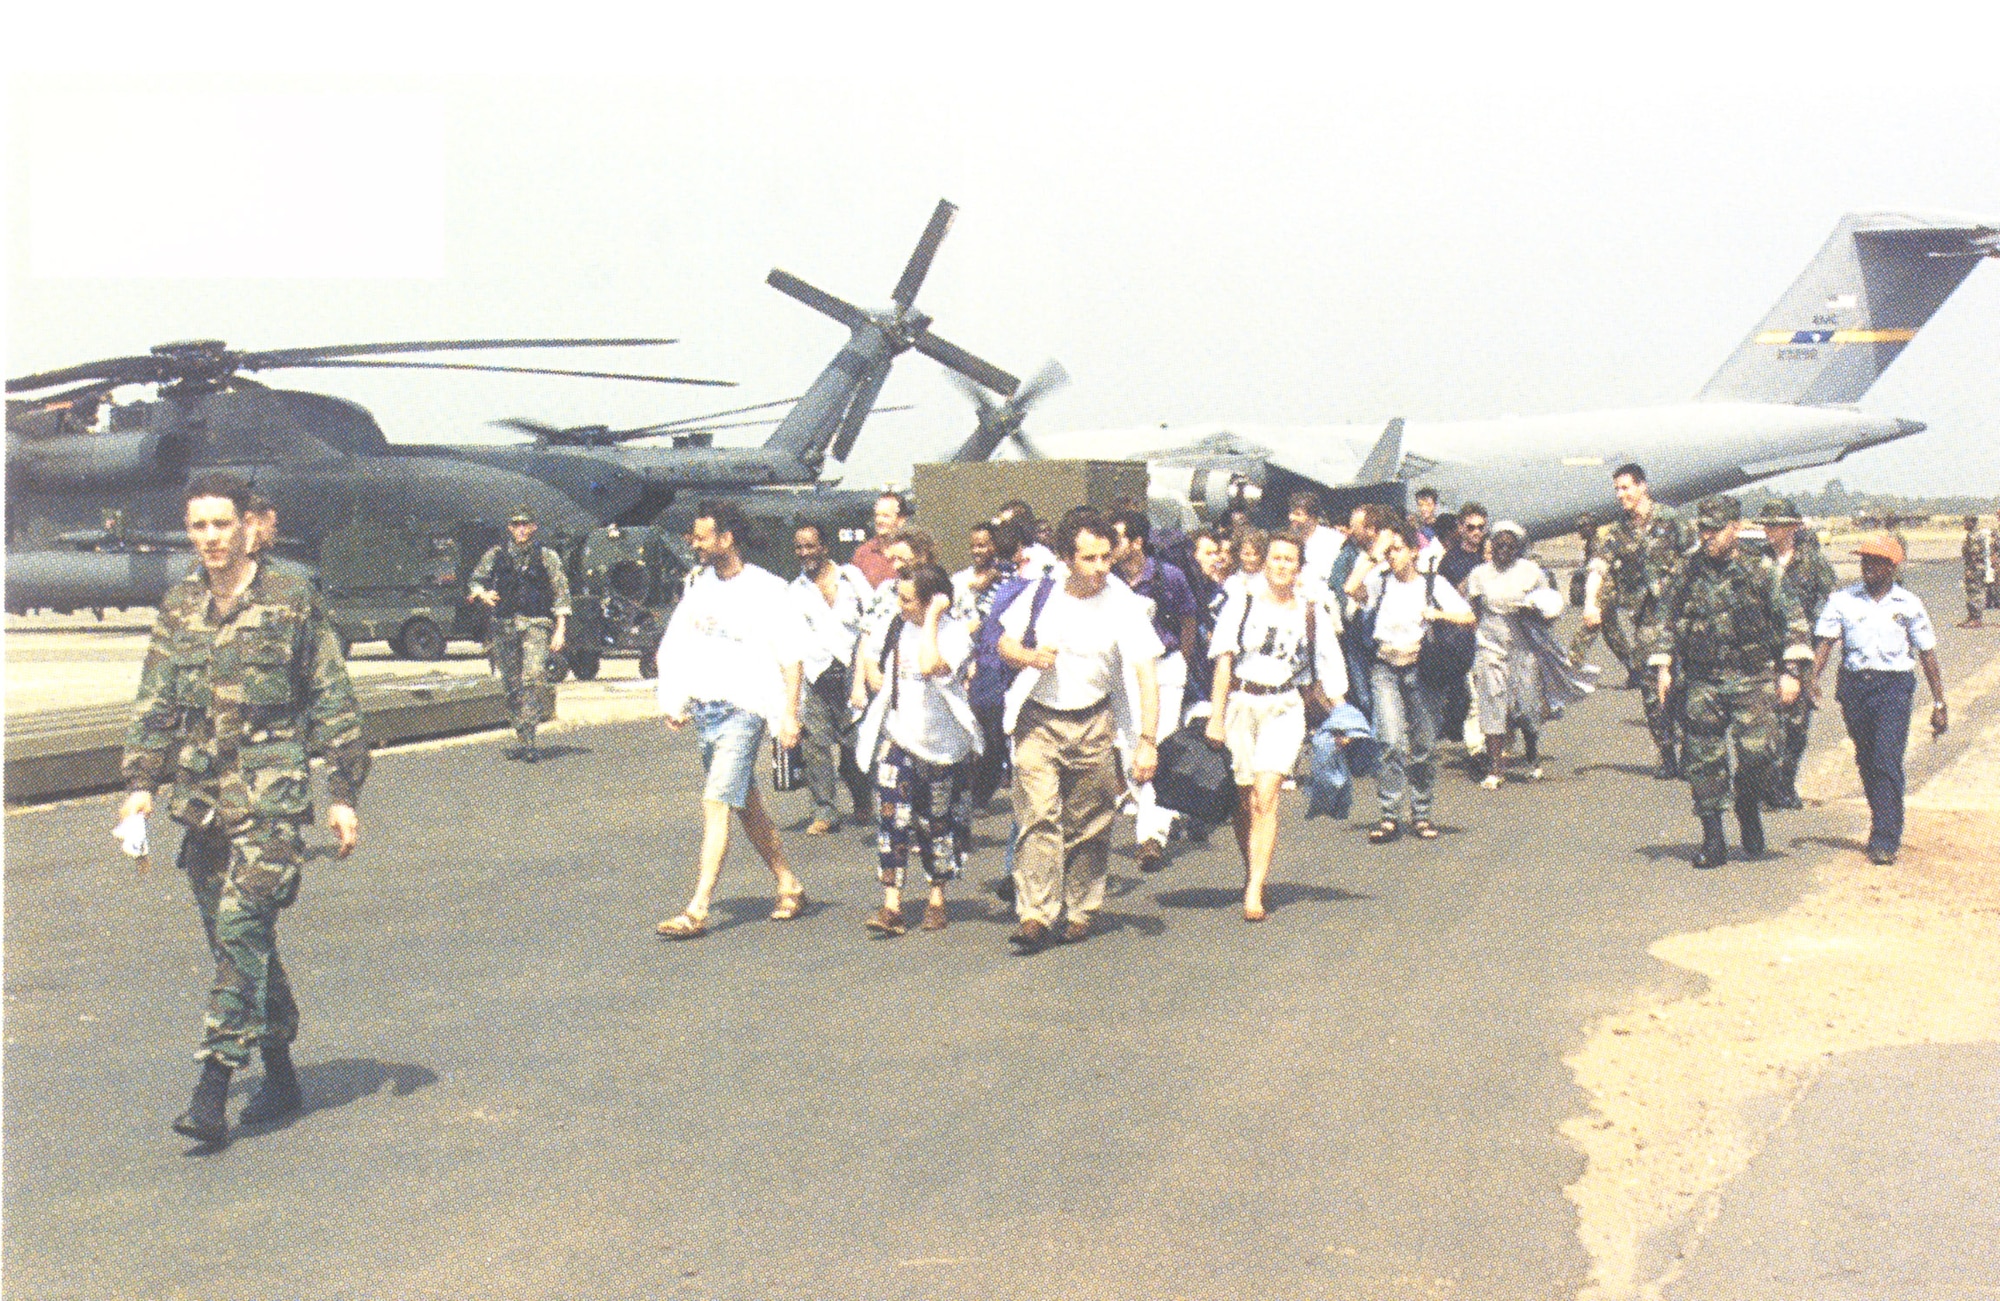 During Operation Assured Response, Special Operations Forces successfully evacuate more than 2,000 people out of the United States Embassy in Liberia, Africa. Operating in a hostile fire environment, SOF personnel conducted dozens of rotary wing evacuation flights using MH-53Js and overhead fire support sorties from AC-130H Spectres, often vectoring friendly aircraft through small arms and rocket propelled grenades. For their efforts, Pave Low crews were presented the Tunner Award as the outstanding strategic airlift crew of the year. (courtesy photo)